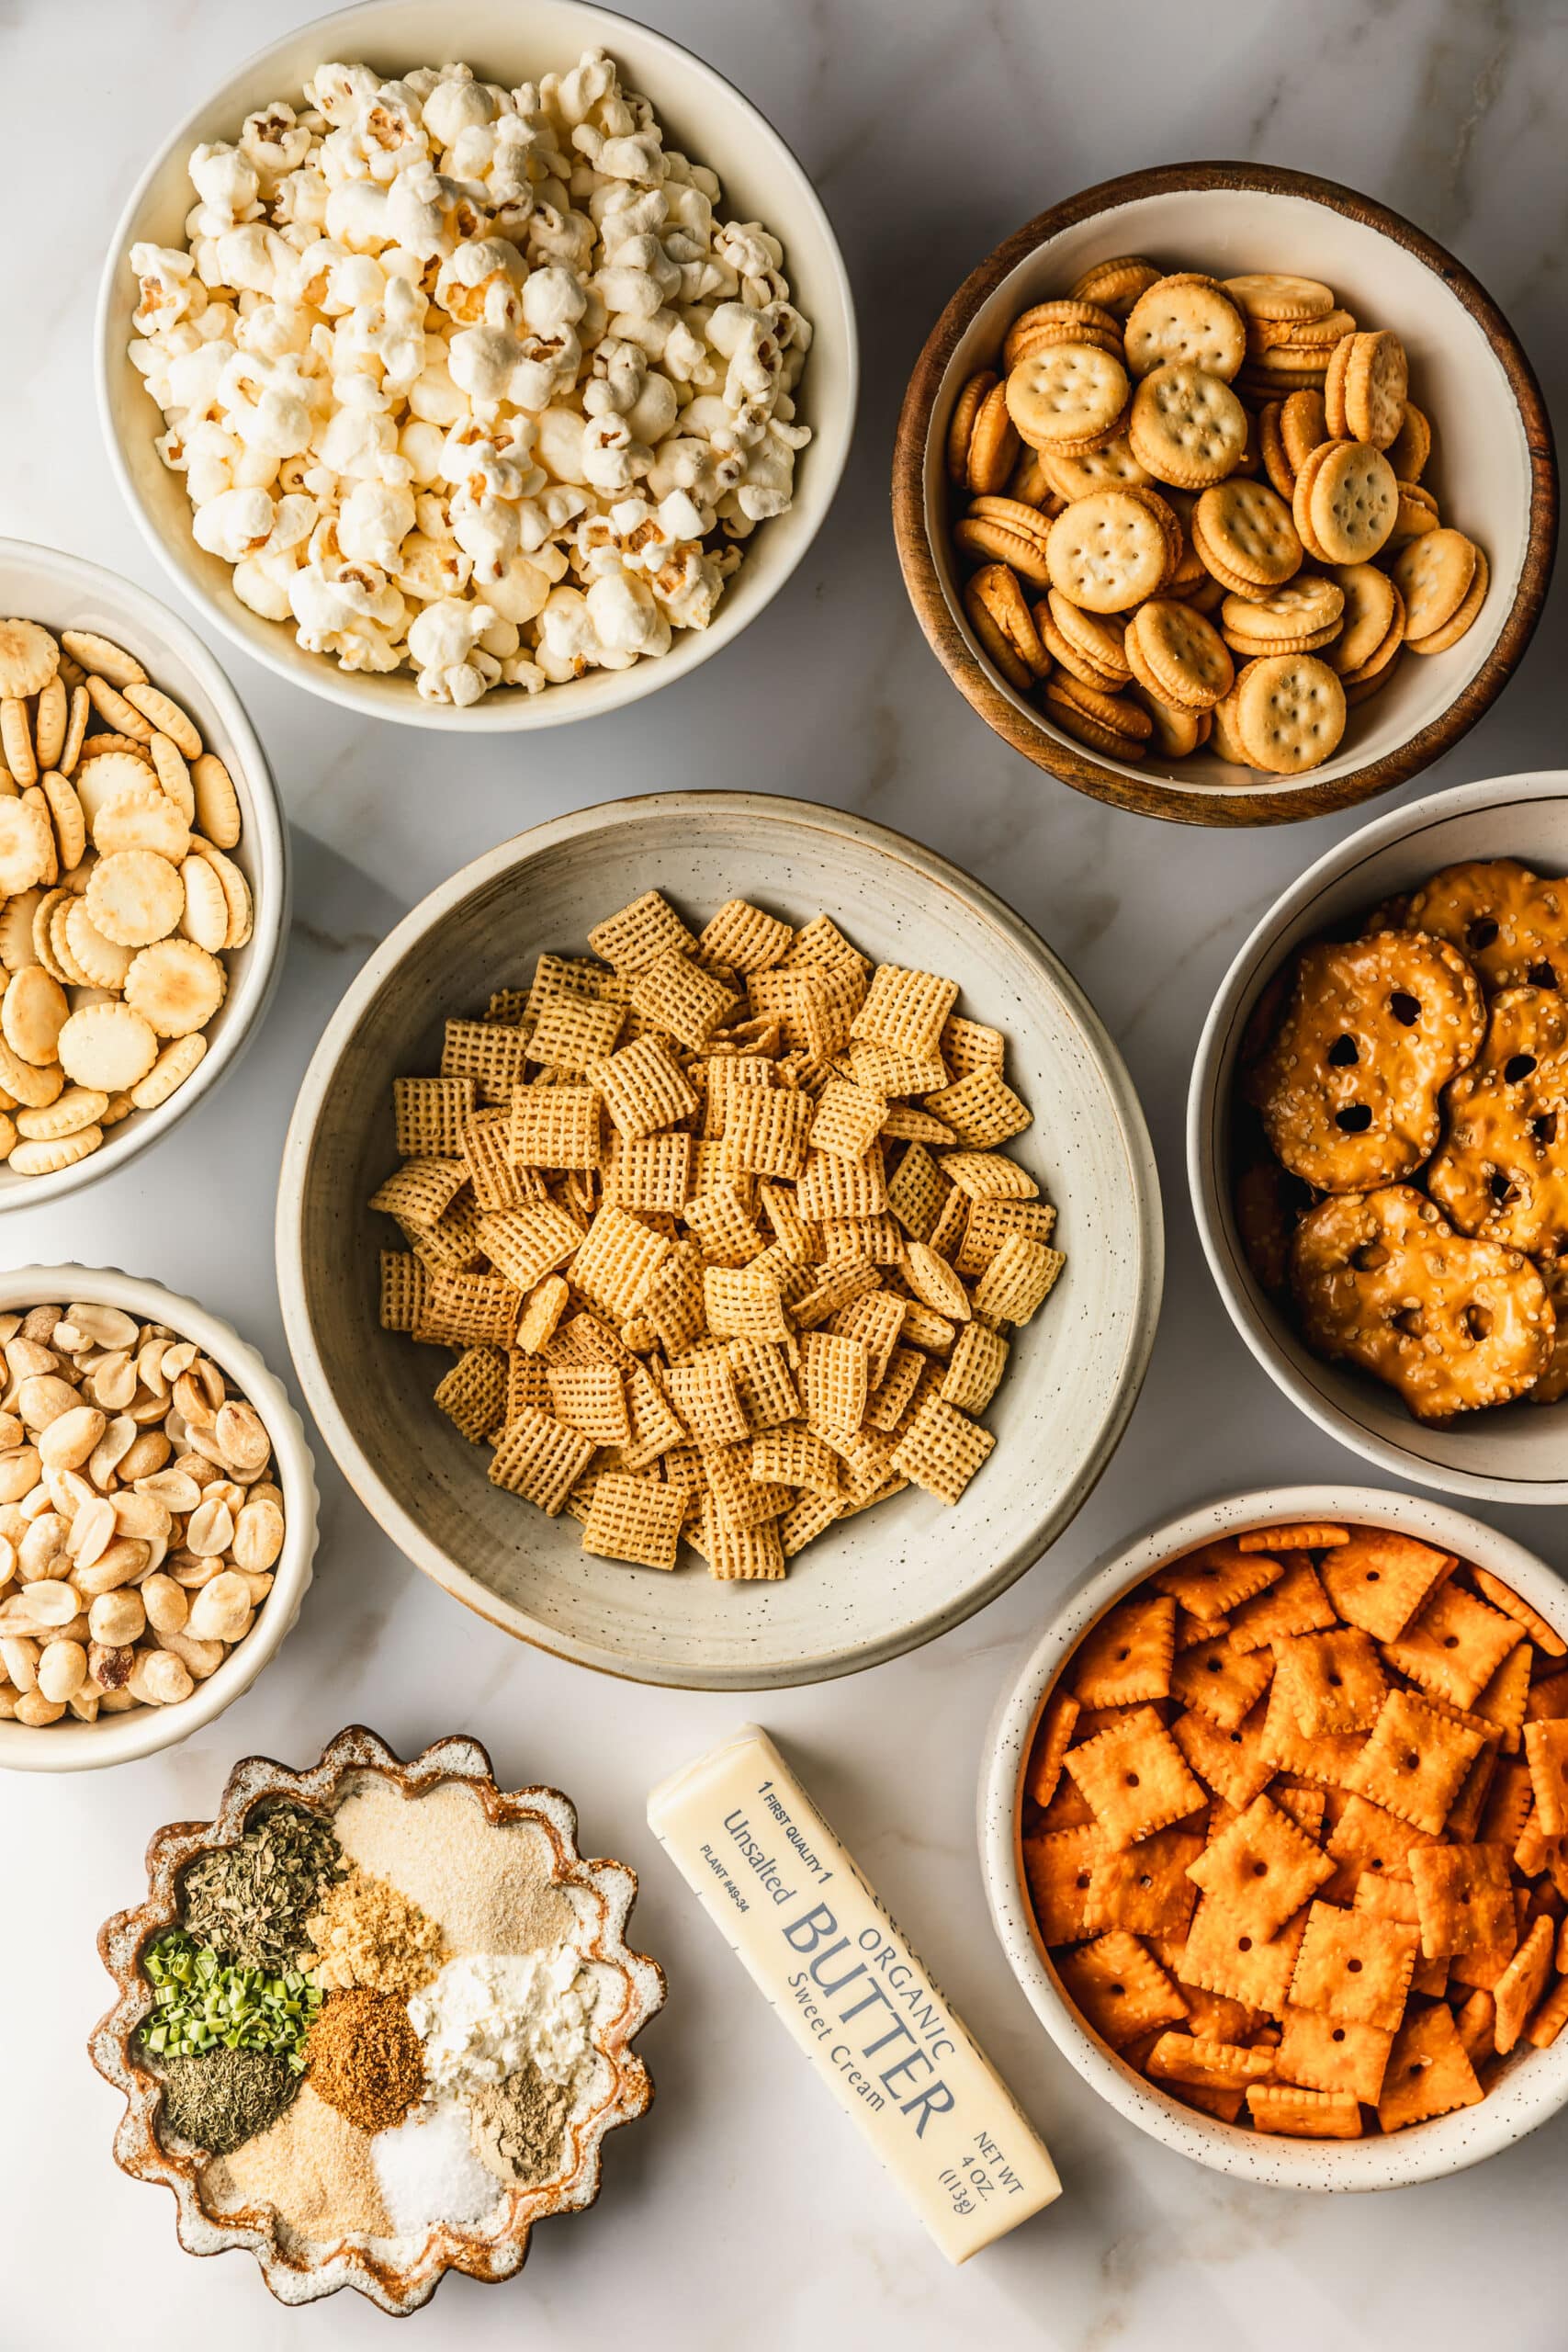 White and brown bowls of cereal, pretzels, Cheez Its, peanuts, spices, oyster crackers, sandwich crackers, popcorn, and butter on a white counter.